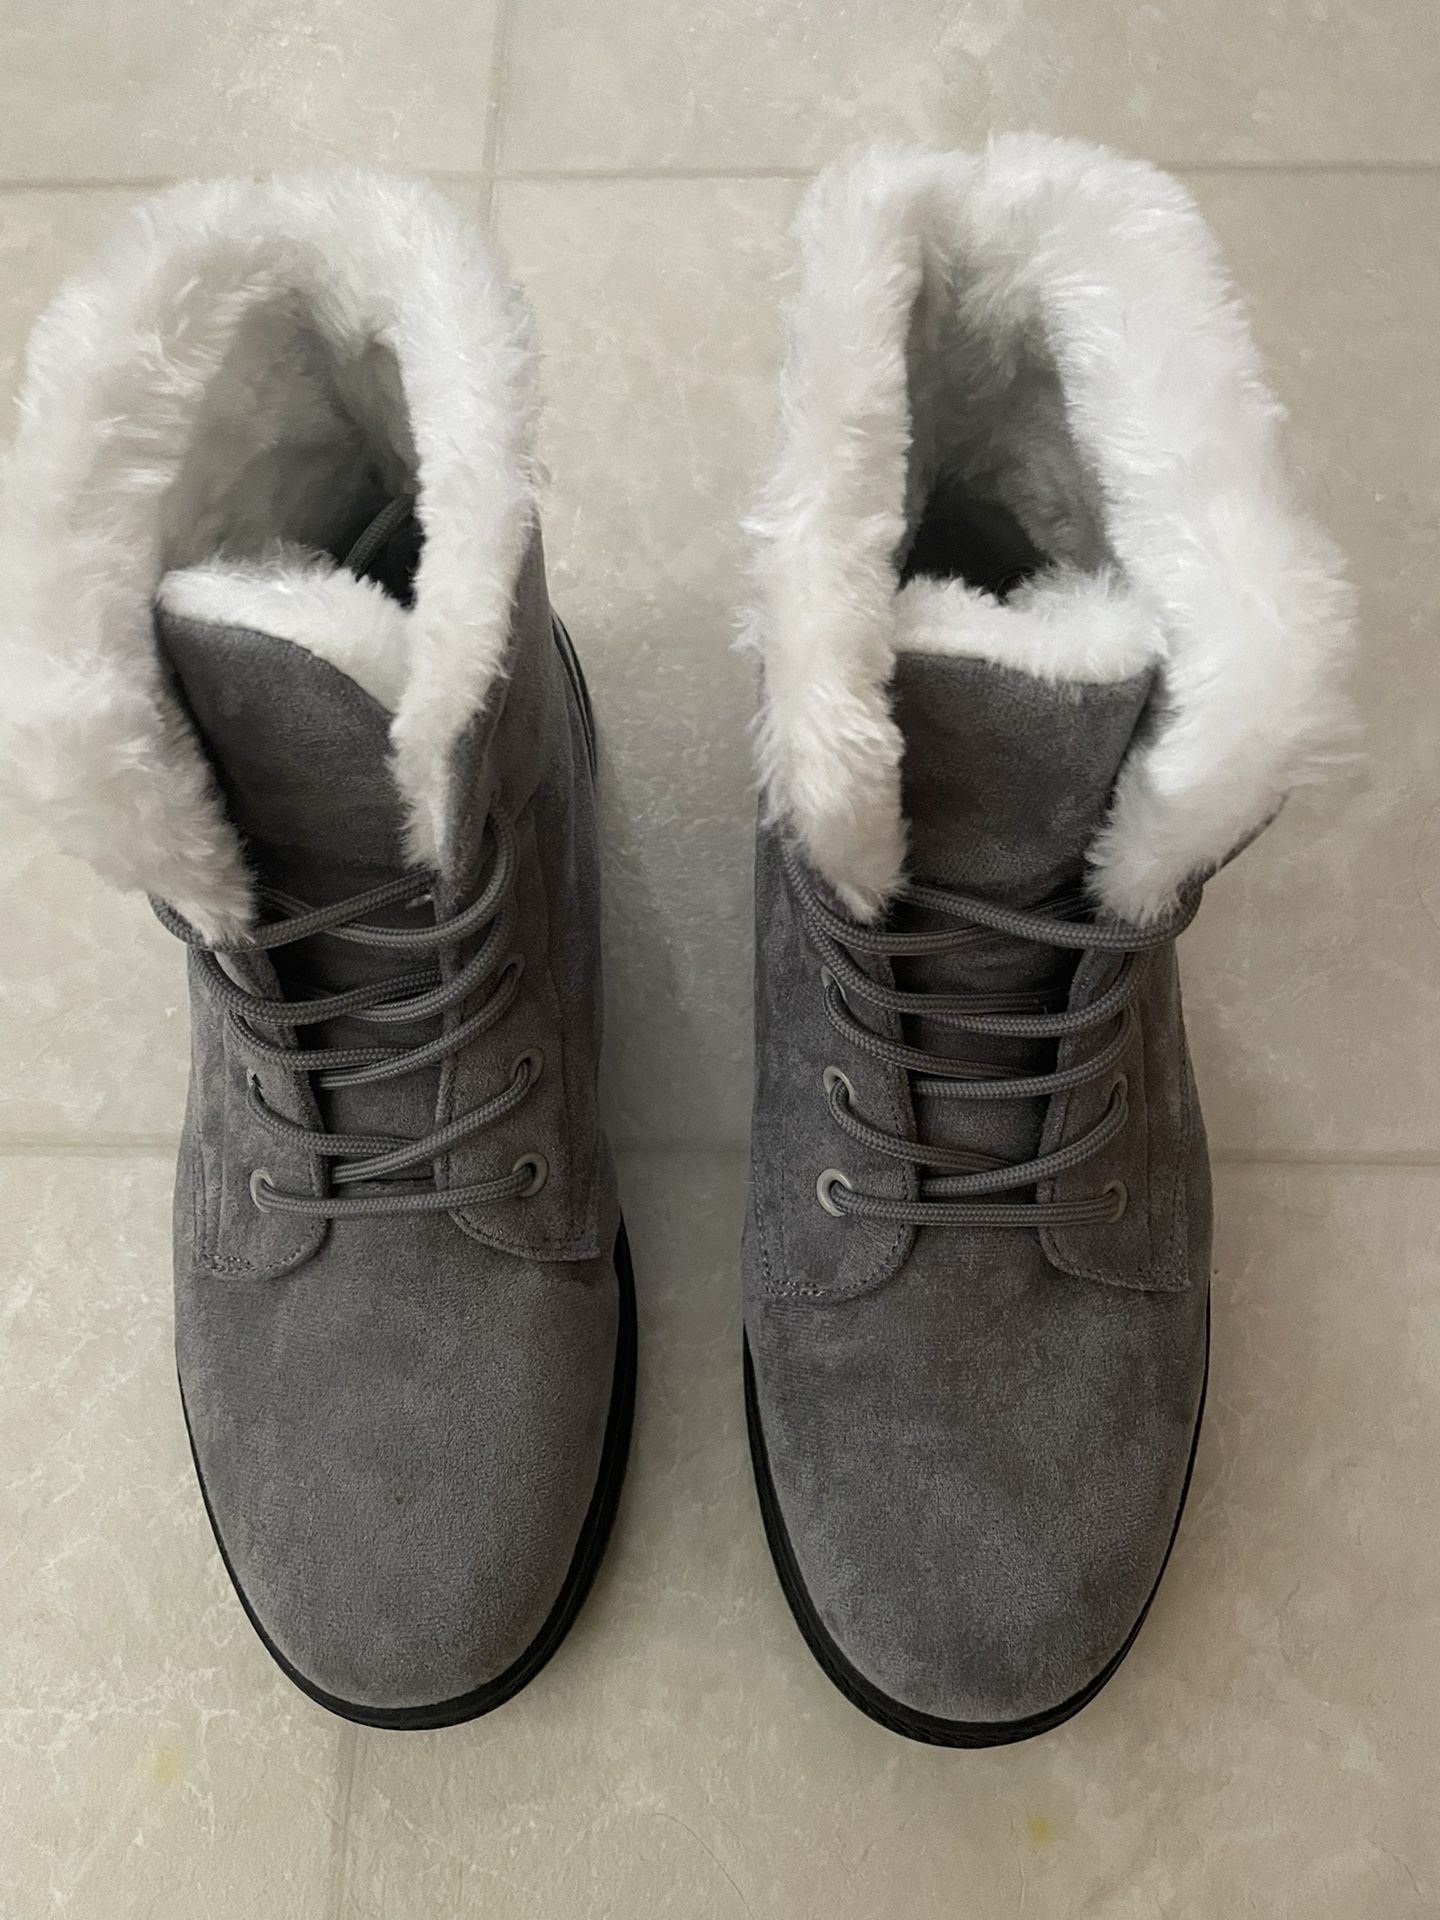 Winter Snow Boots for Women...